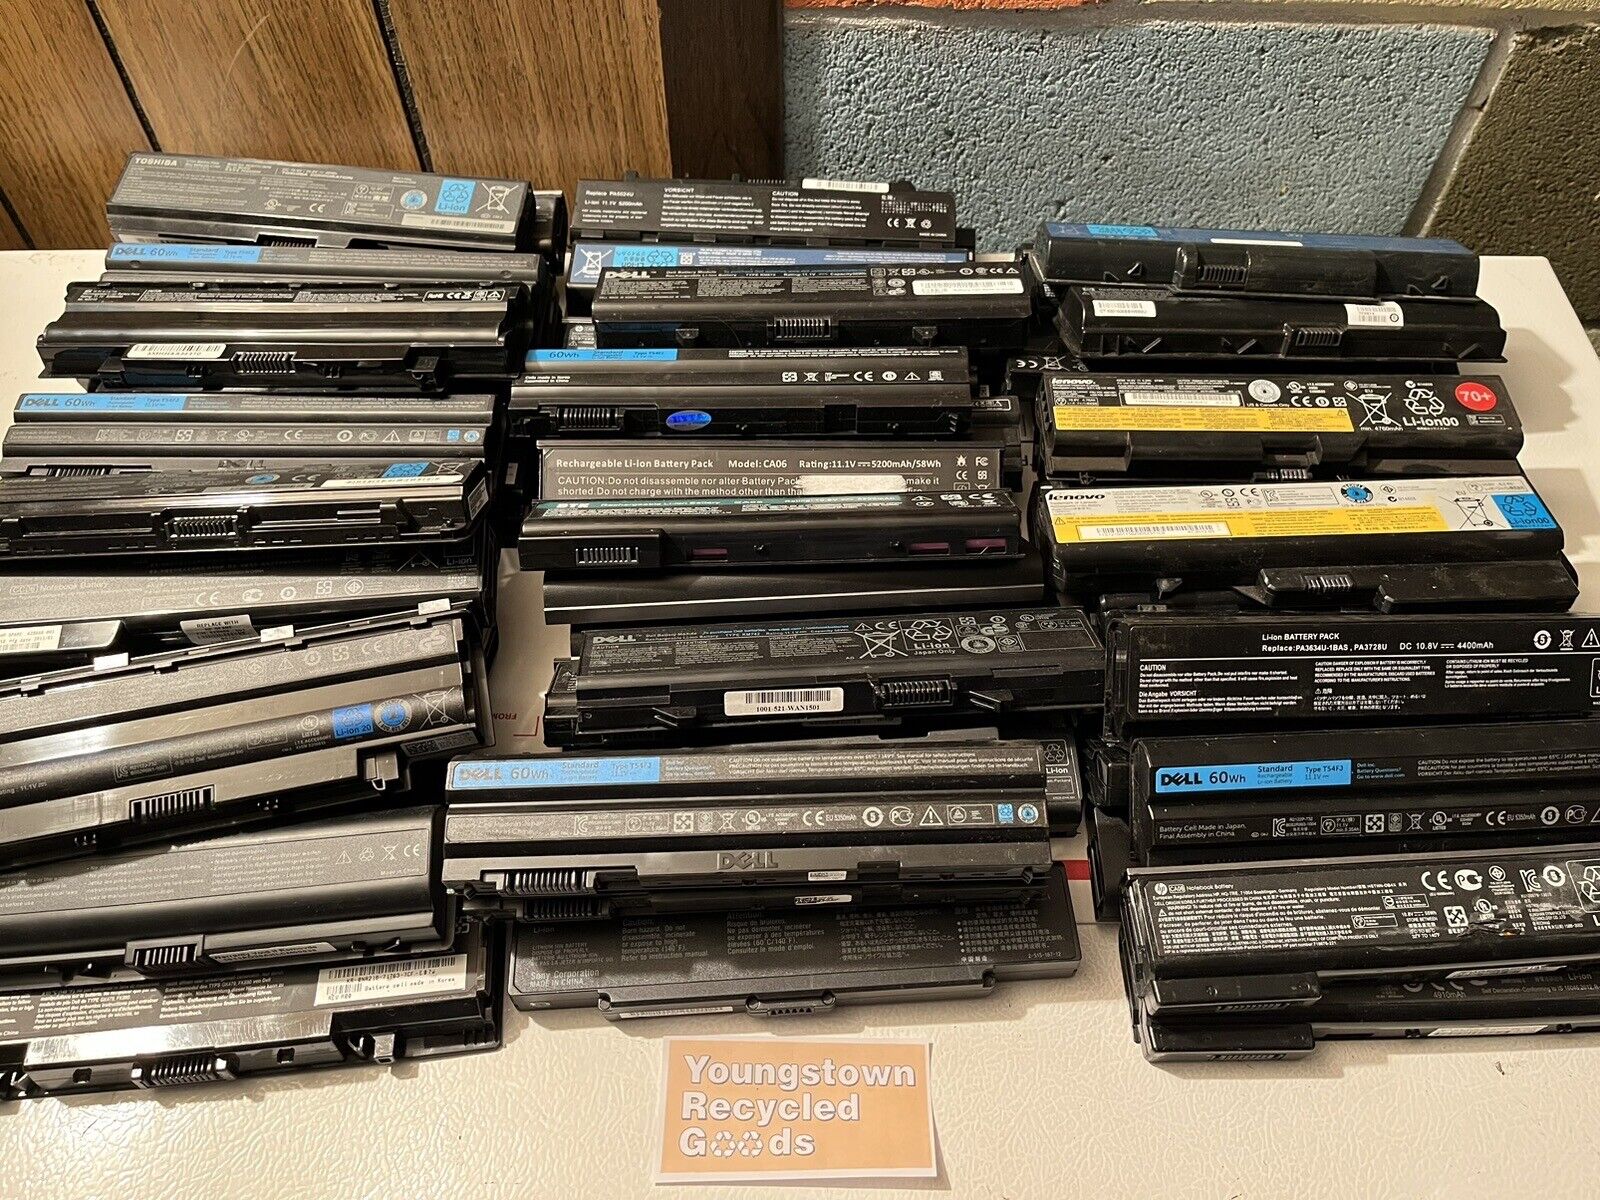 LOT OF 31 LITHIUM ION LAPTOP BATTERIES FOR SCRAP/CELL RECOVERY 20 lbs.